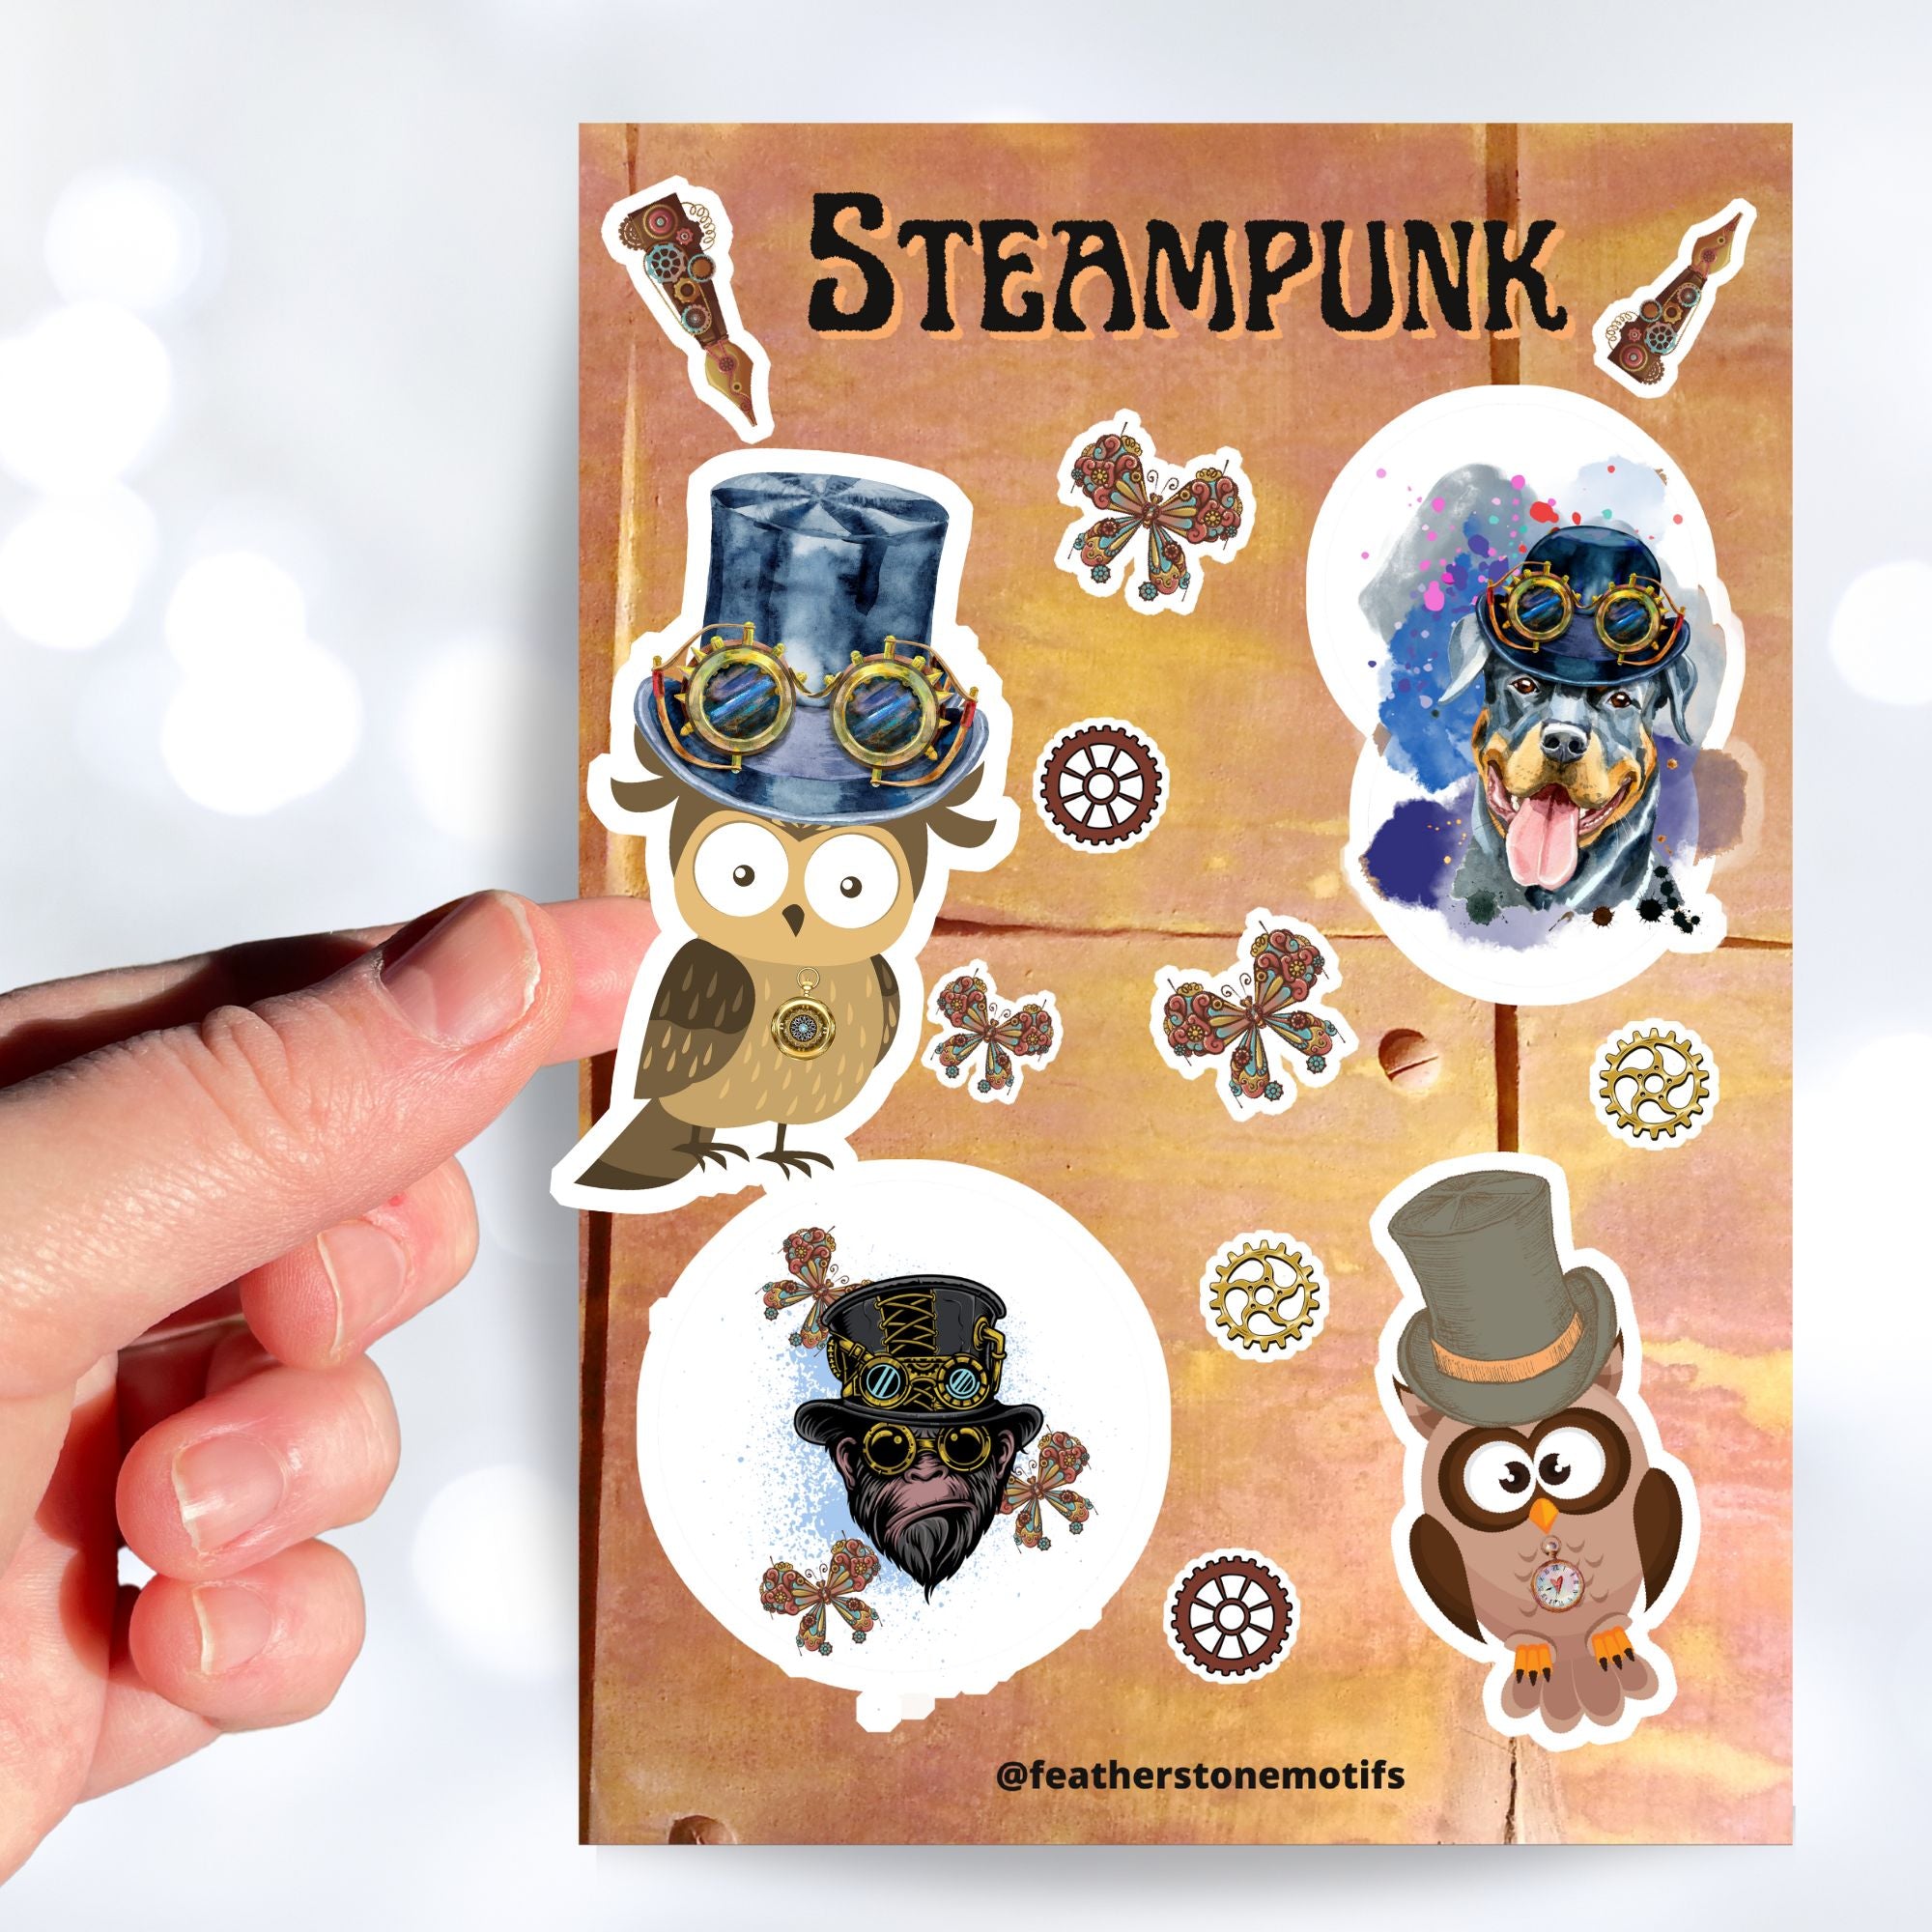 This Steampunk sticker sheet features four large animal stickers: Mr. and Mrs. Owl, Steampunk Monkey, and Steampunk Rotty (Rottweiler) along with smaller miscellaneous gear, butterfly, and pen stickers.  This image shows a hand holding the Mrs. Owl sticker above the sticker sheet. Mrs. Owl is an owl with a steampunk hat and goggles and a clock necklace.